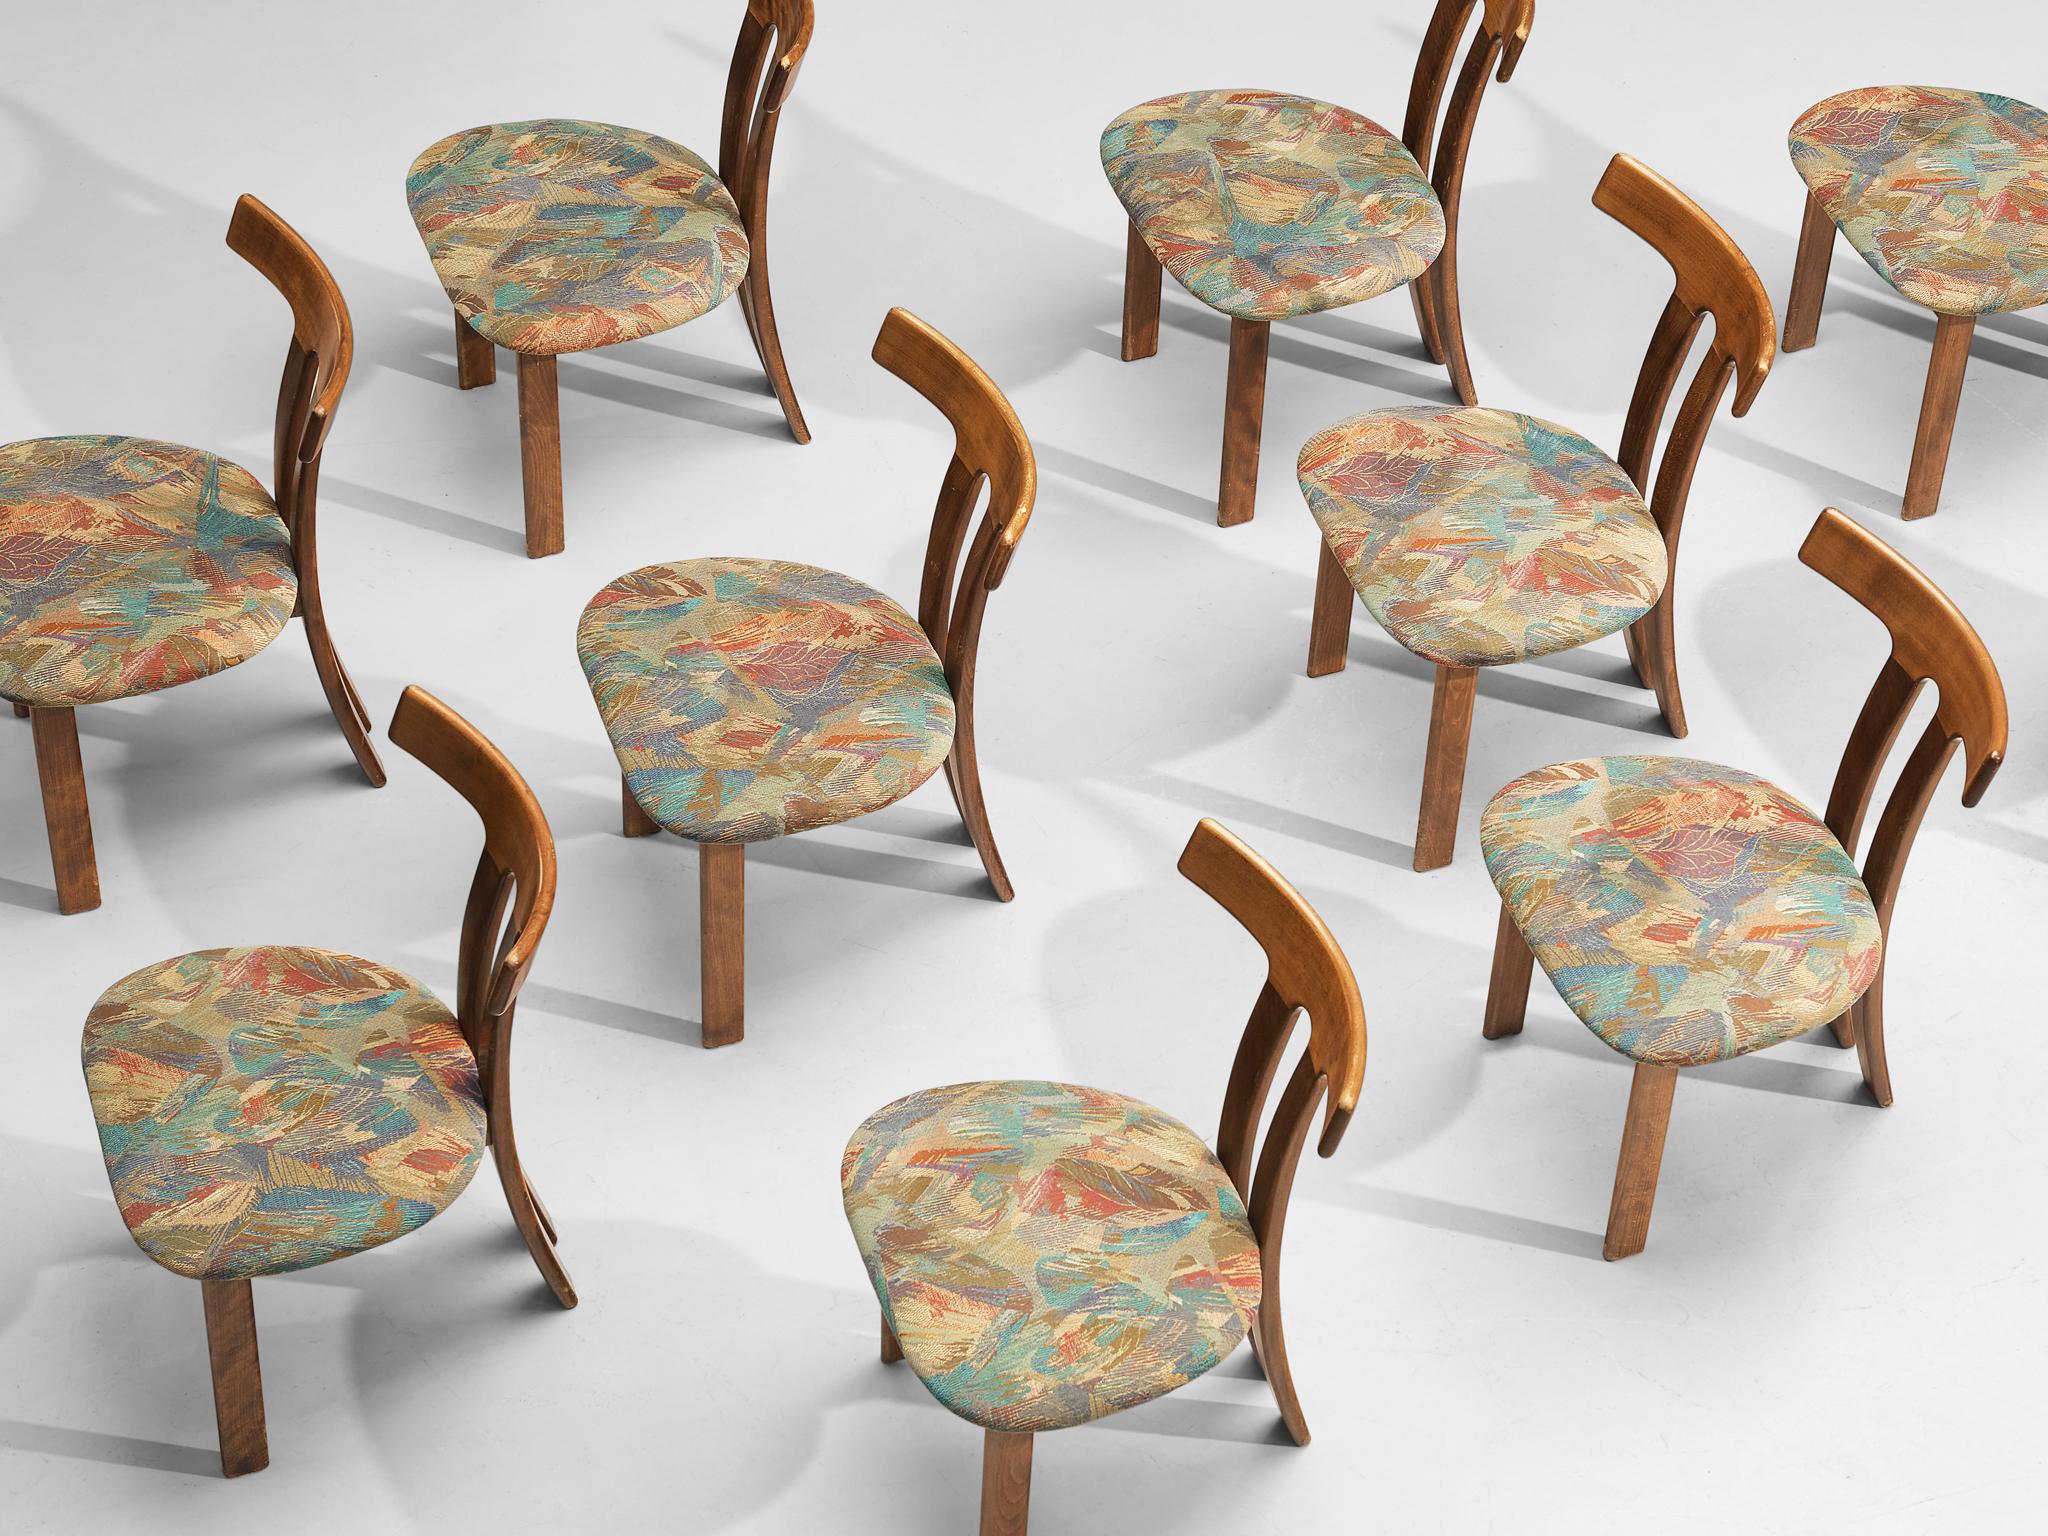 Scandinavian Modern Set of 8 Danish Dining Chairs with Organic Wood Frames and Fabric Upholstery